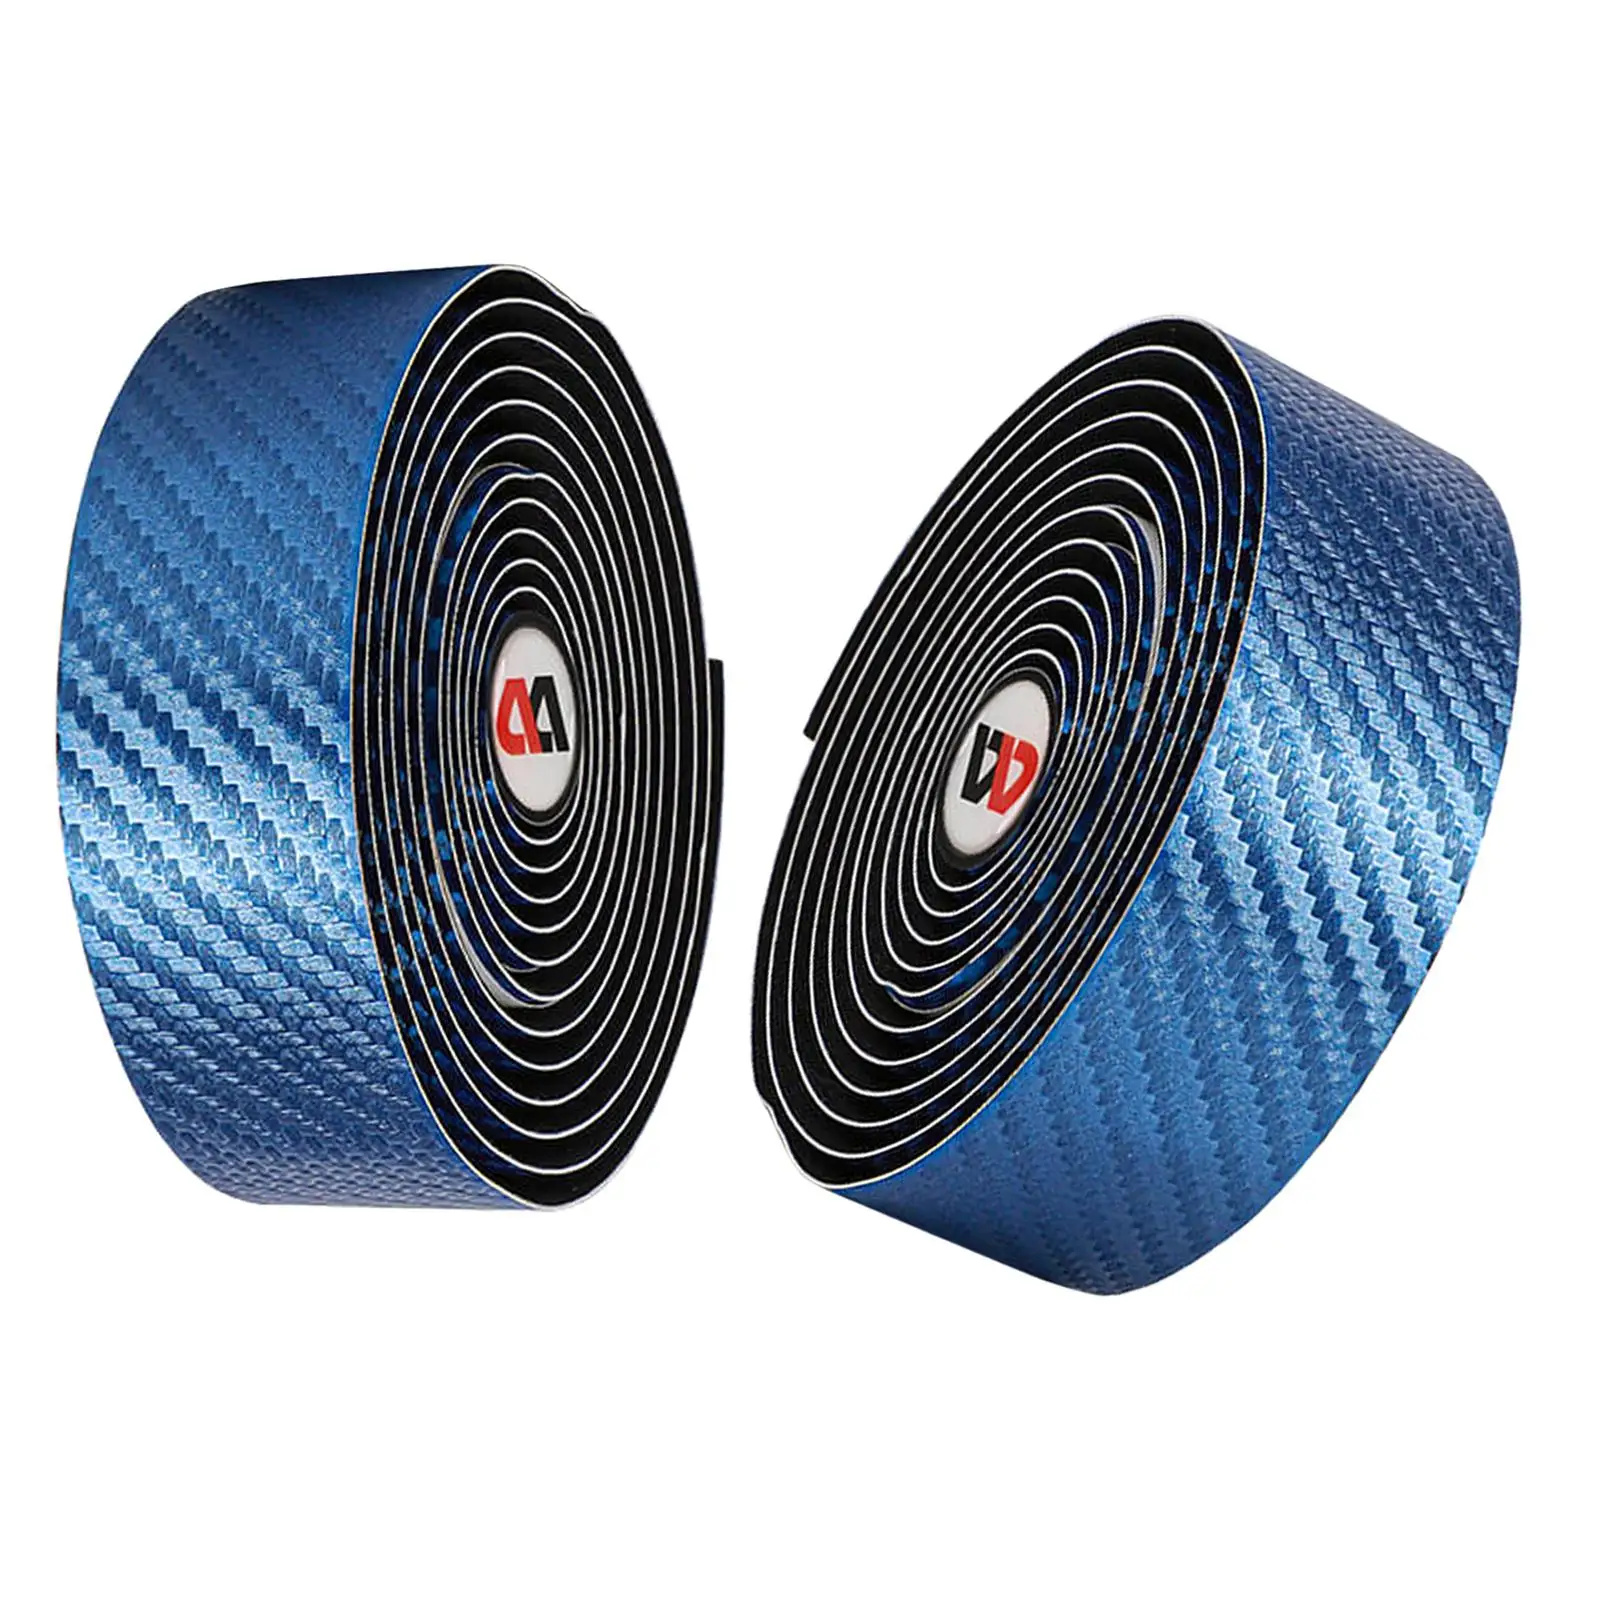 2x Damping Bike Handlebar Tapes Soft Safety Cycling Textured